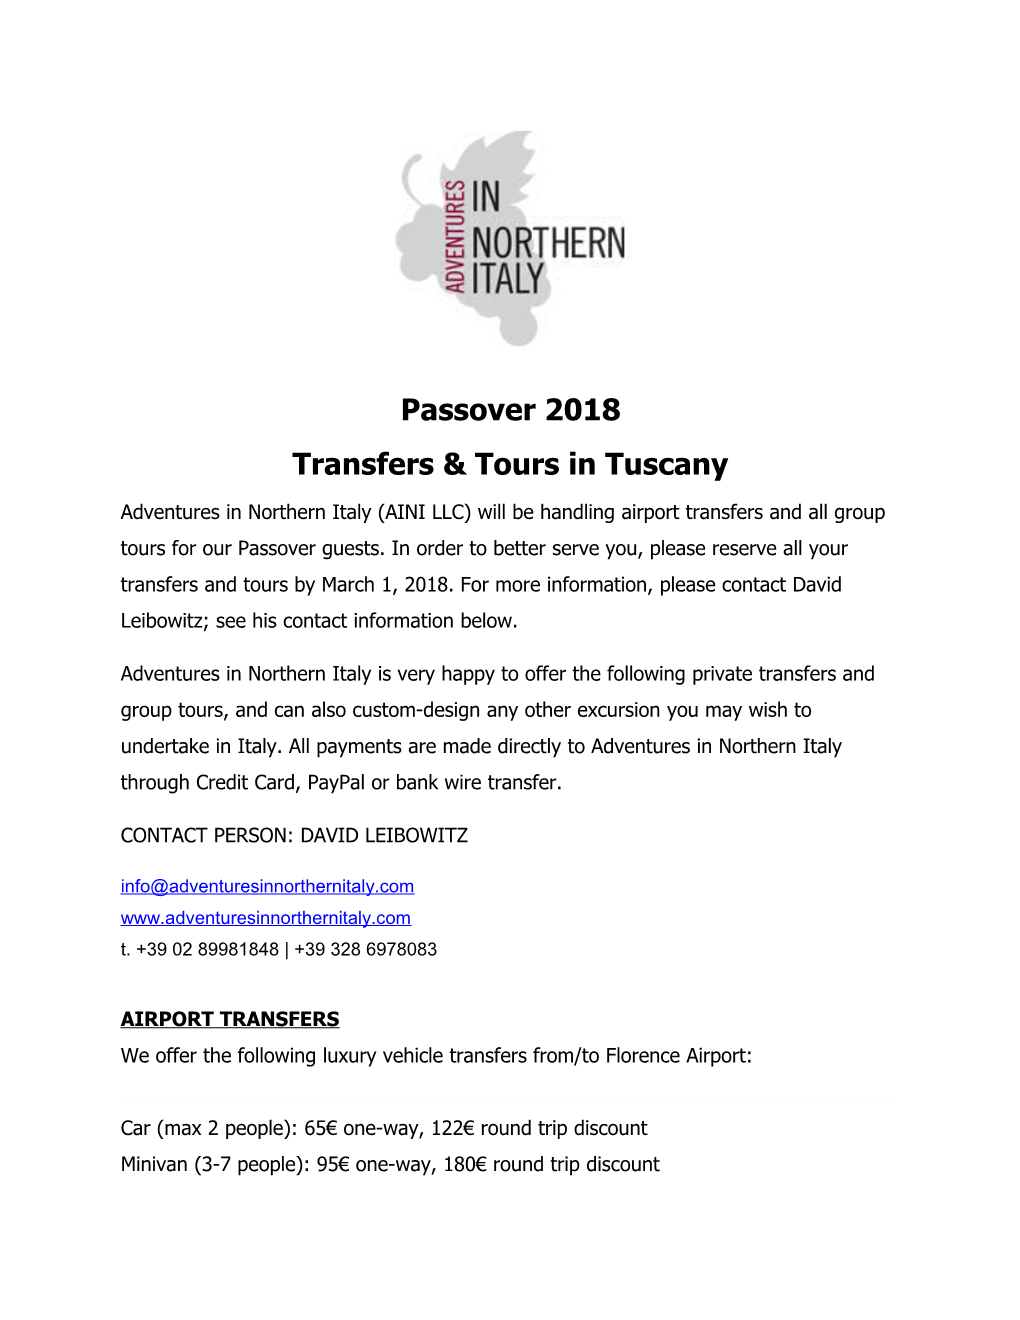 Transfers & Tours in Tuscany